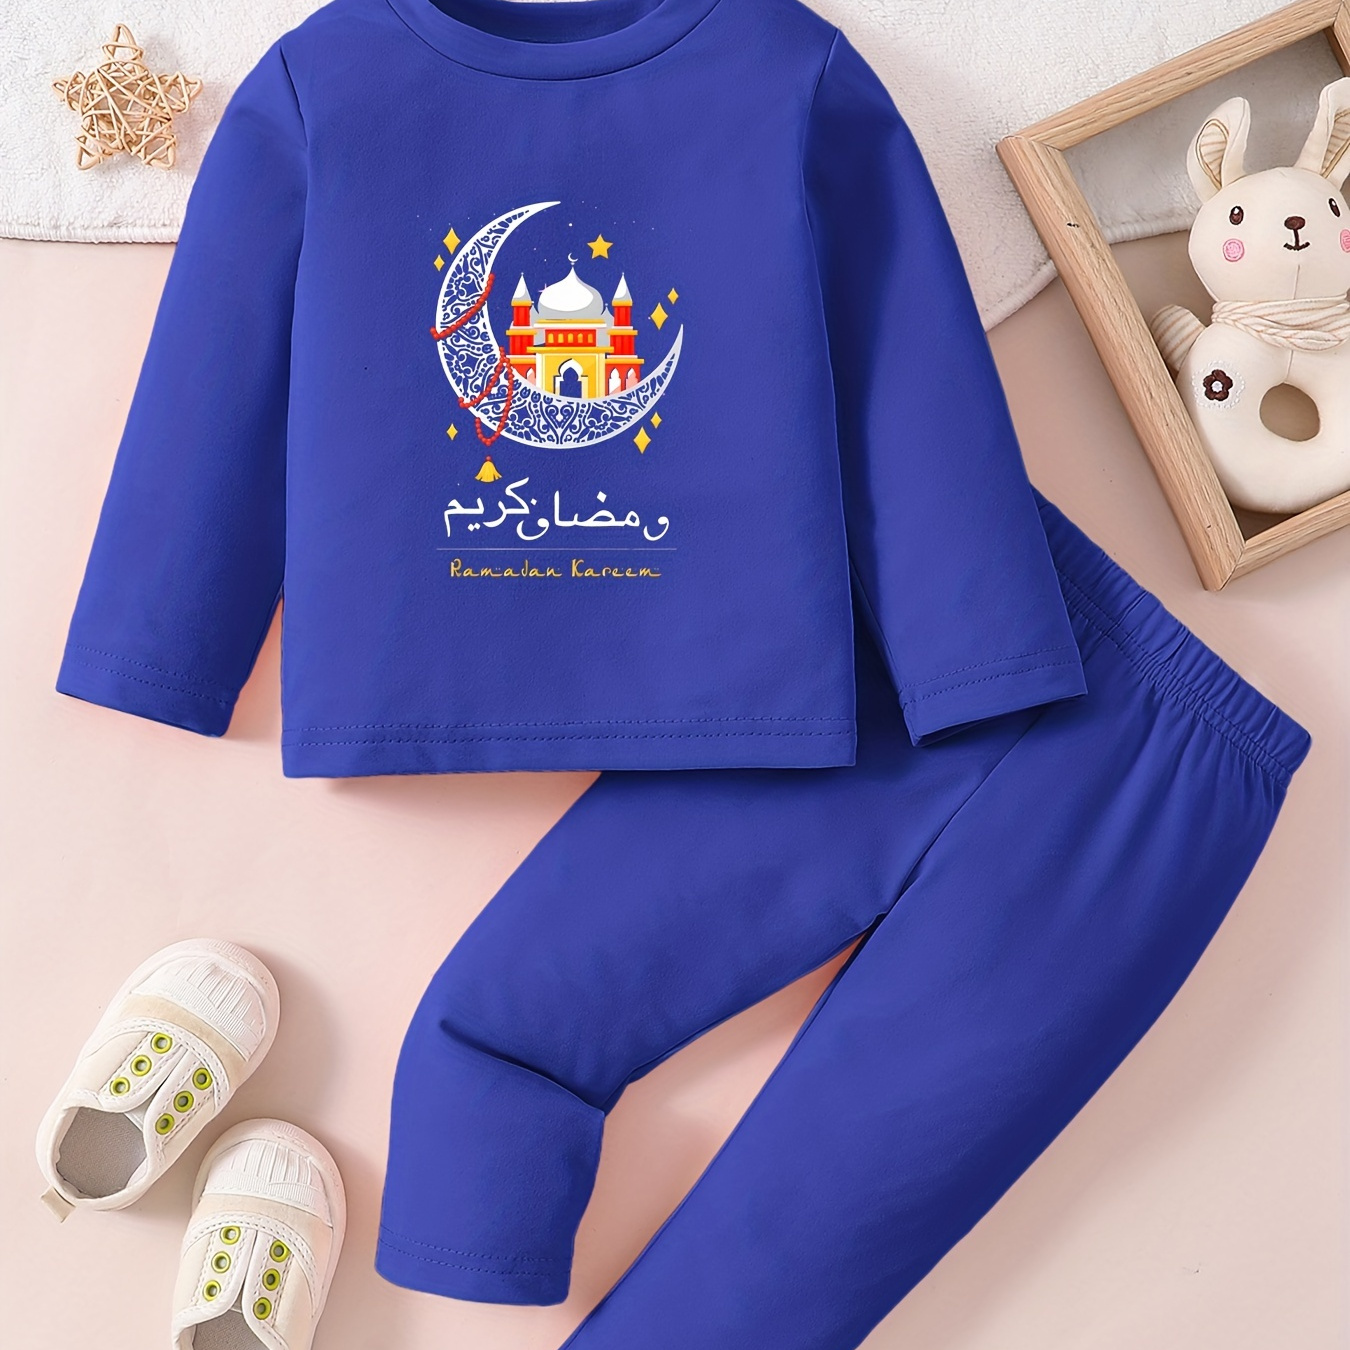 

2pcs Ramadan Festival Colorful Building Print Casual Outfit For Infants & Toddler Kids, Long Sleeve T-shirt & Pants Set, Baby Girl's Clothes, Ramadan